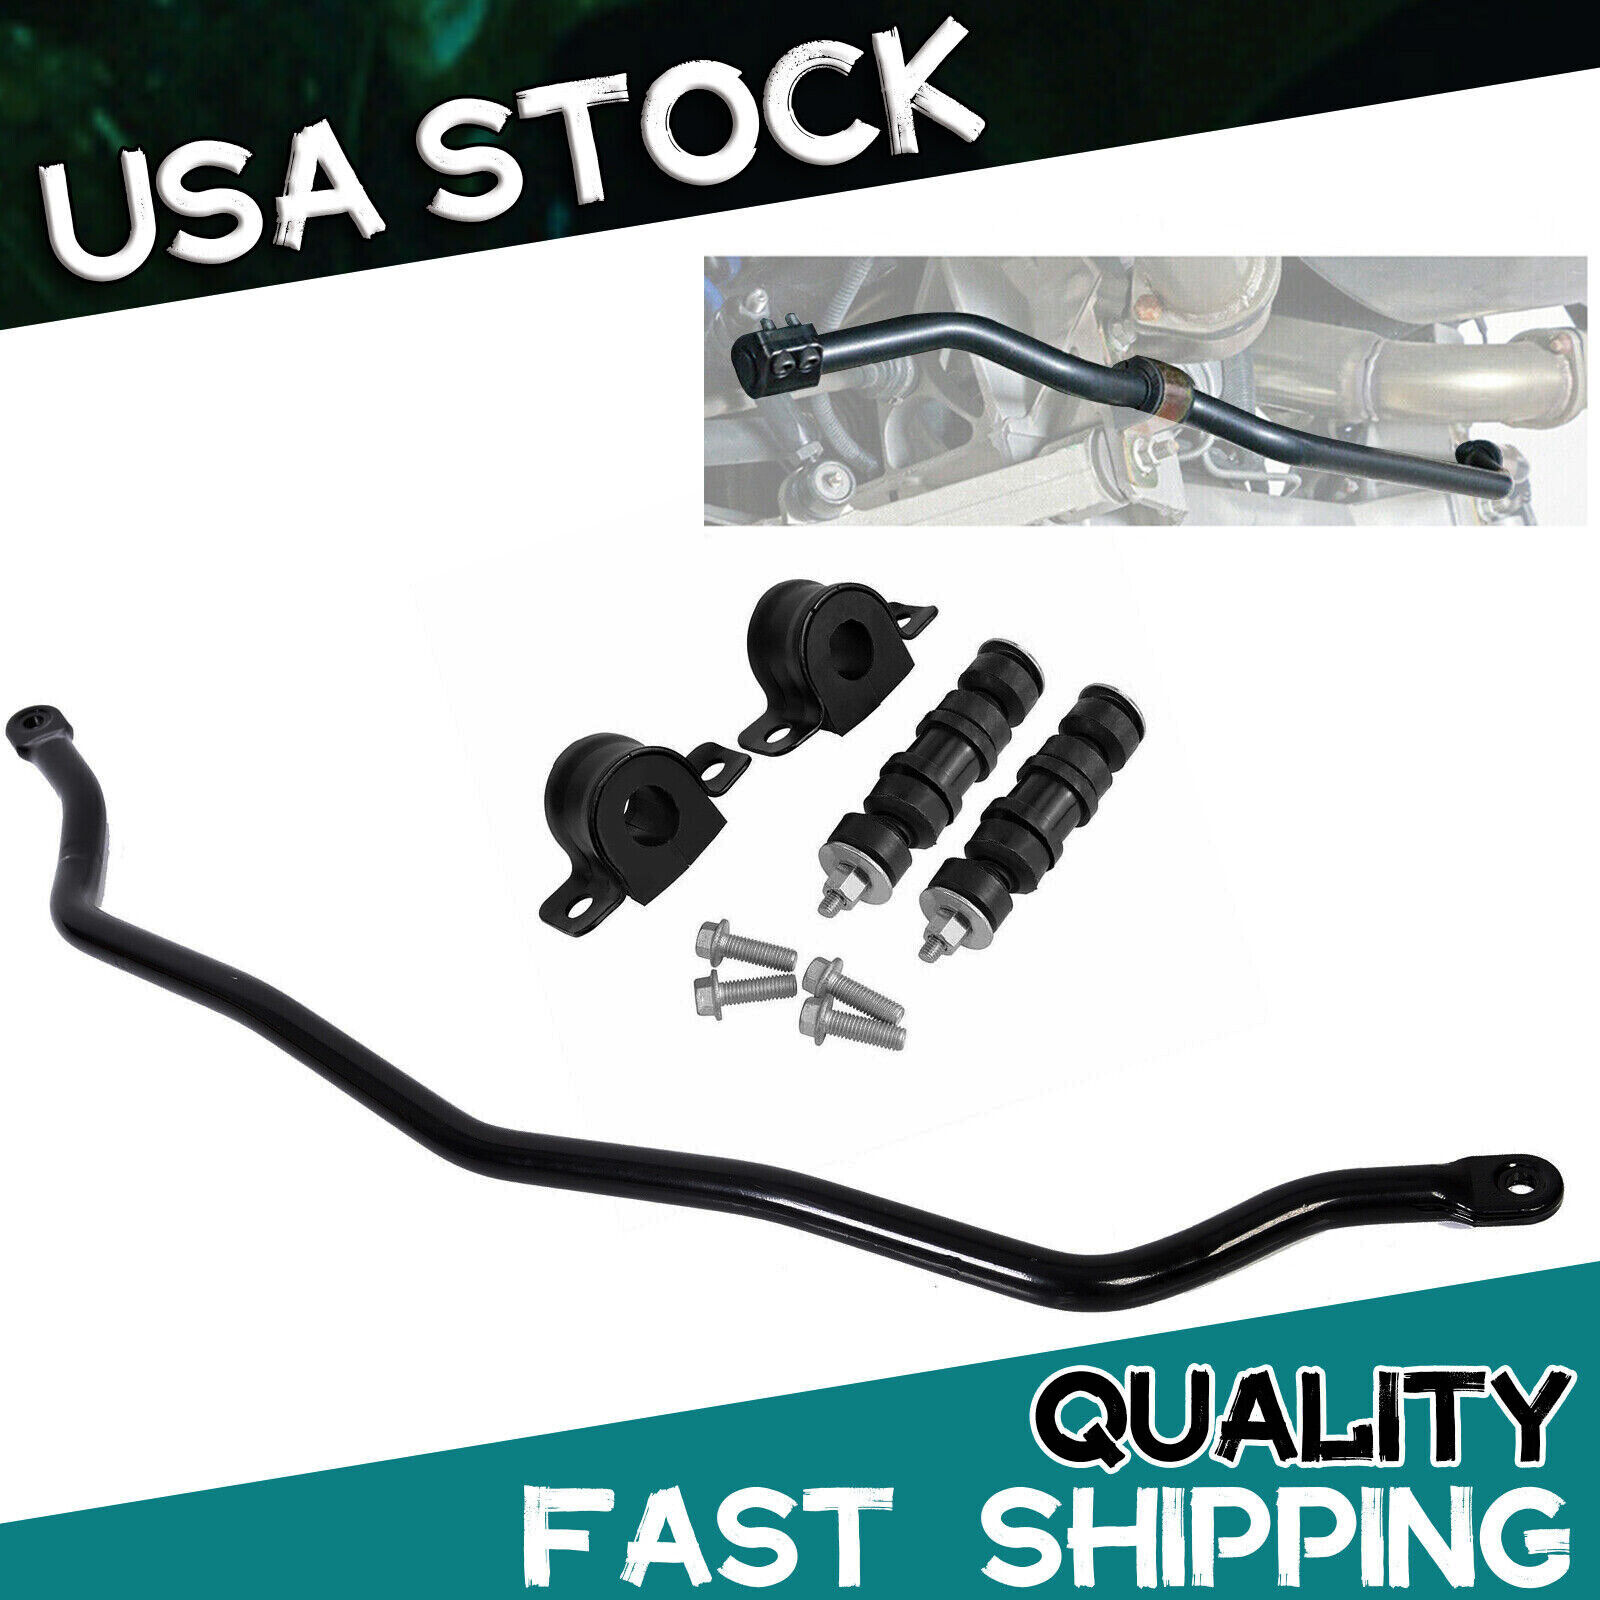 Sway Bar Kit Front For Chevy Olds Chevrolet Impala Pontiac Grand Prix Century